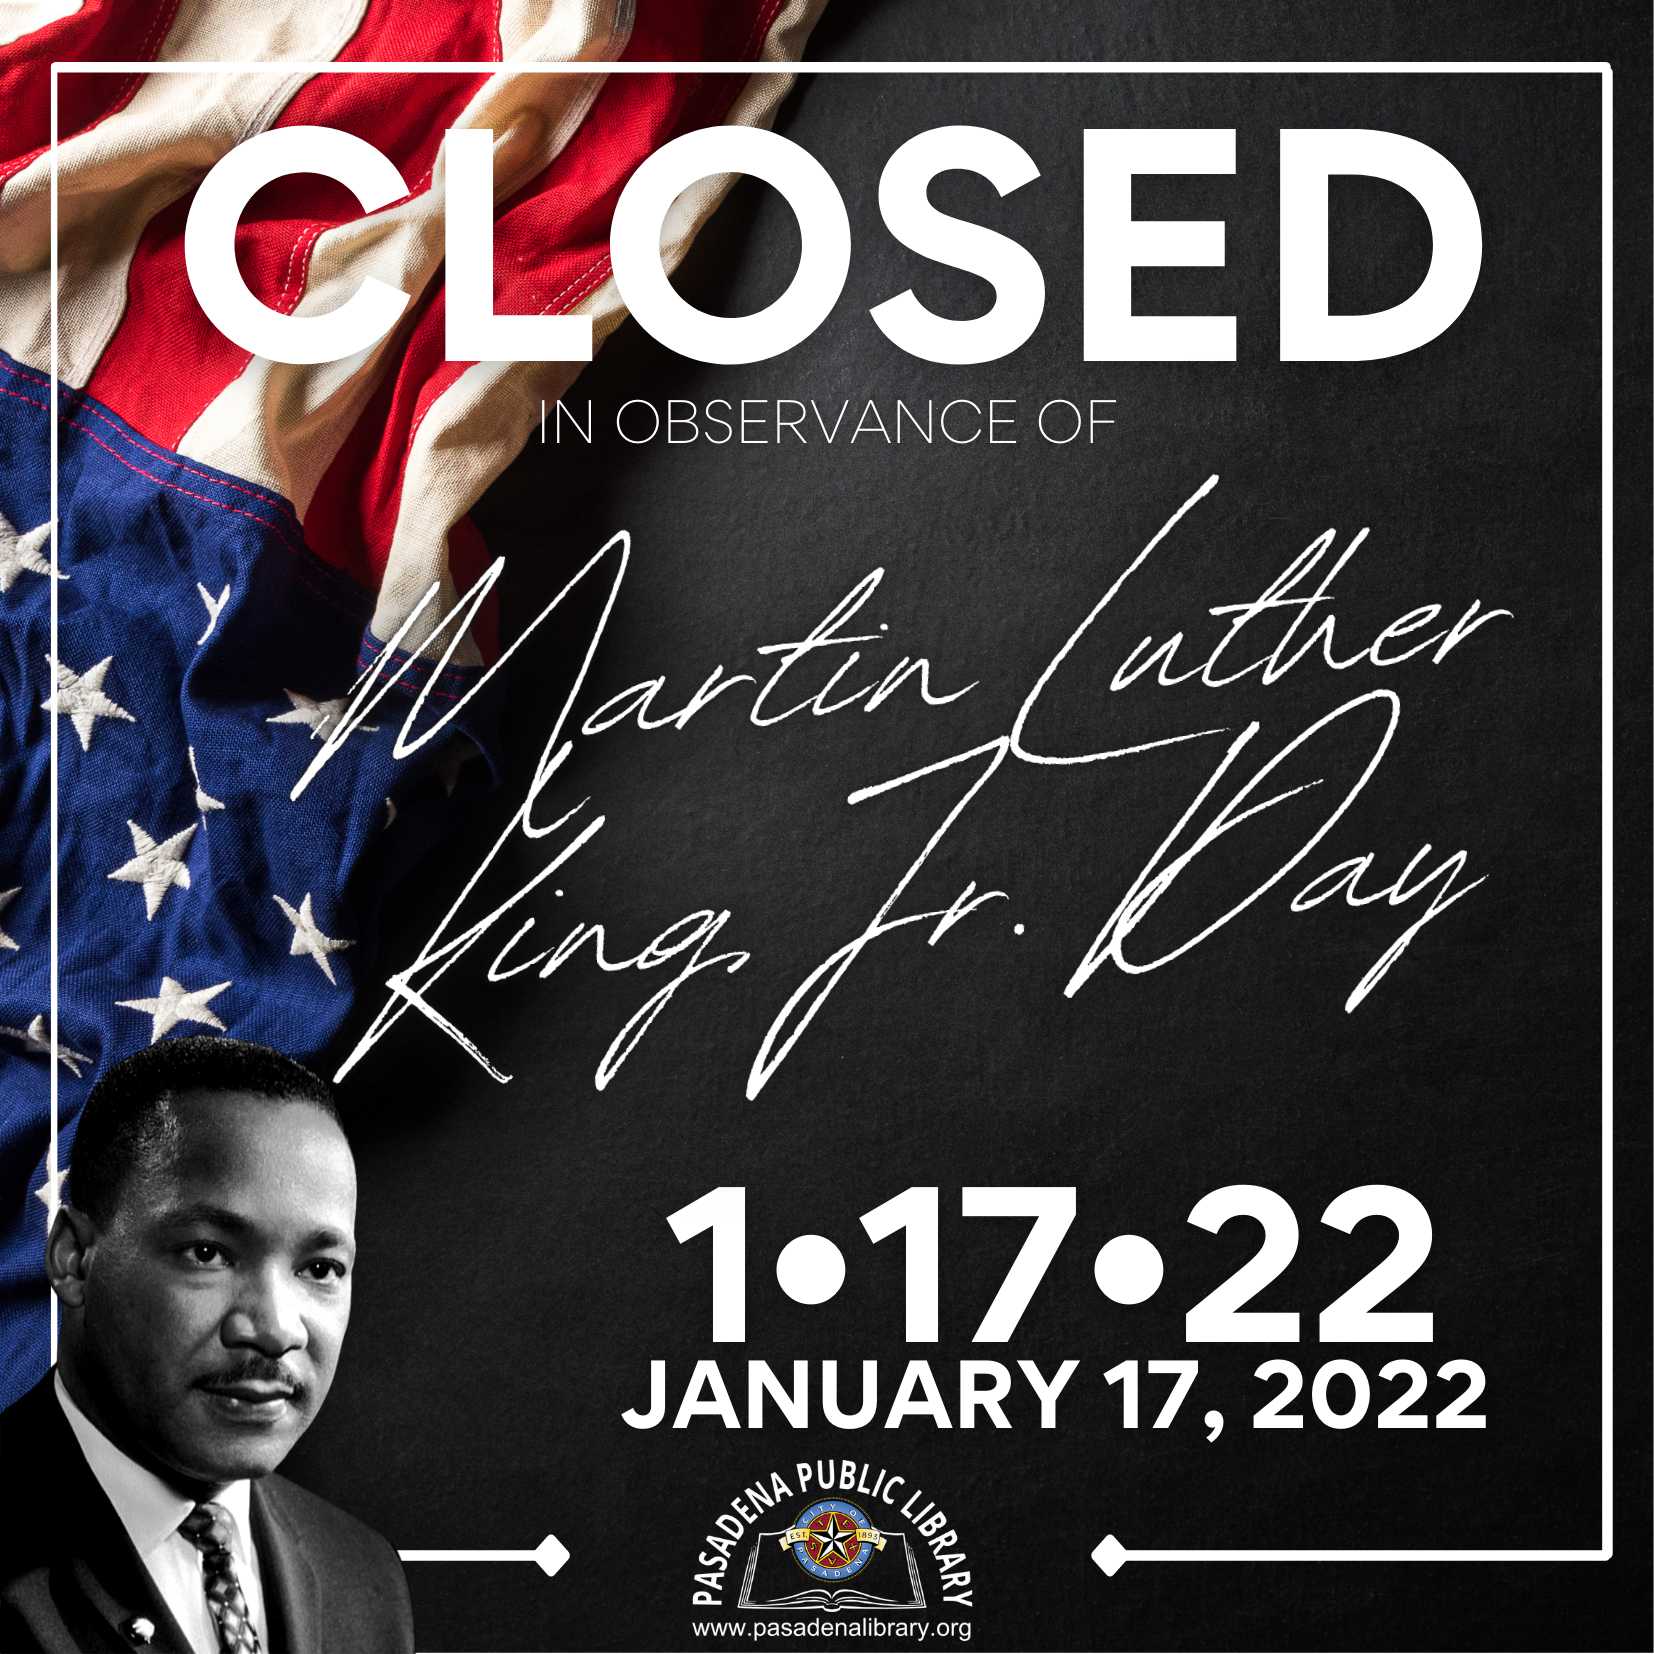 Closed in observance of Martin Luther King, Jr. Day